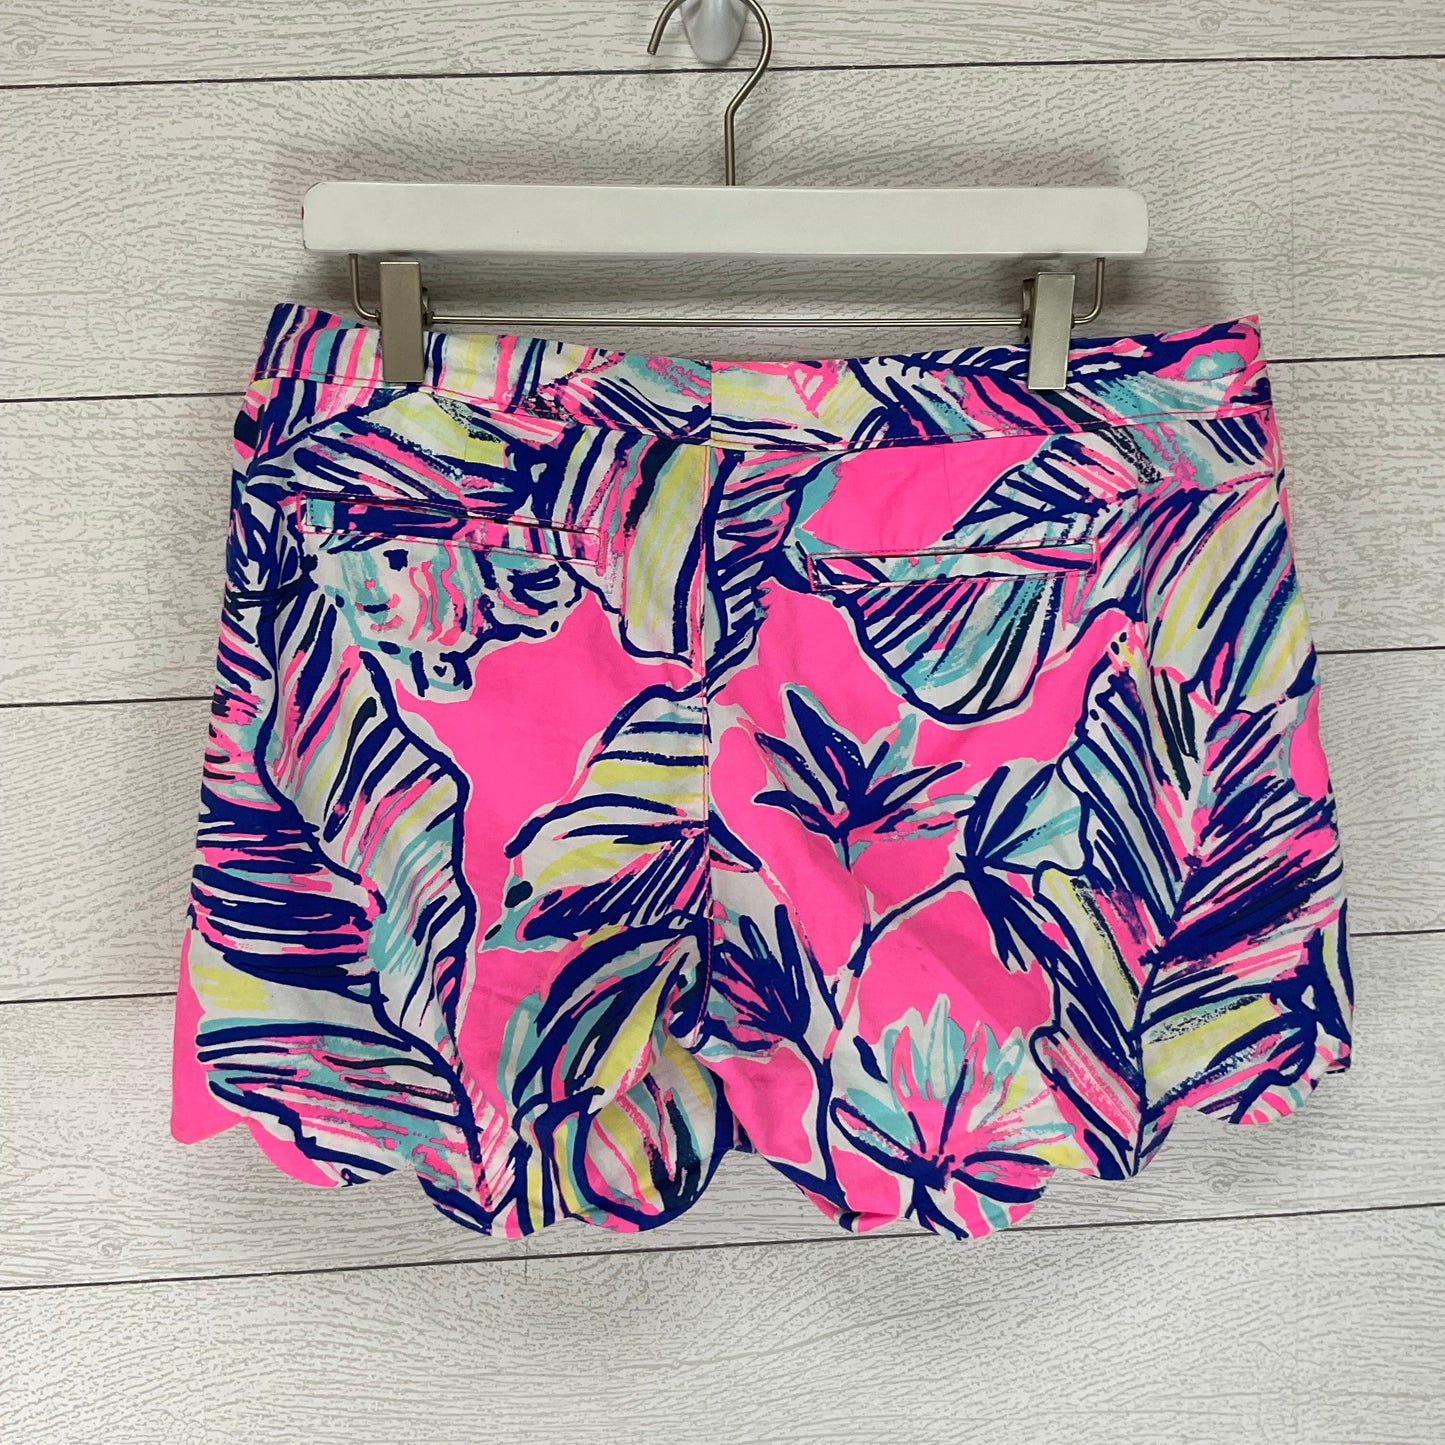 Blue & Pink Shorts Lilly Pulitzer, Size 6